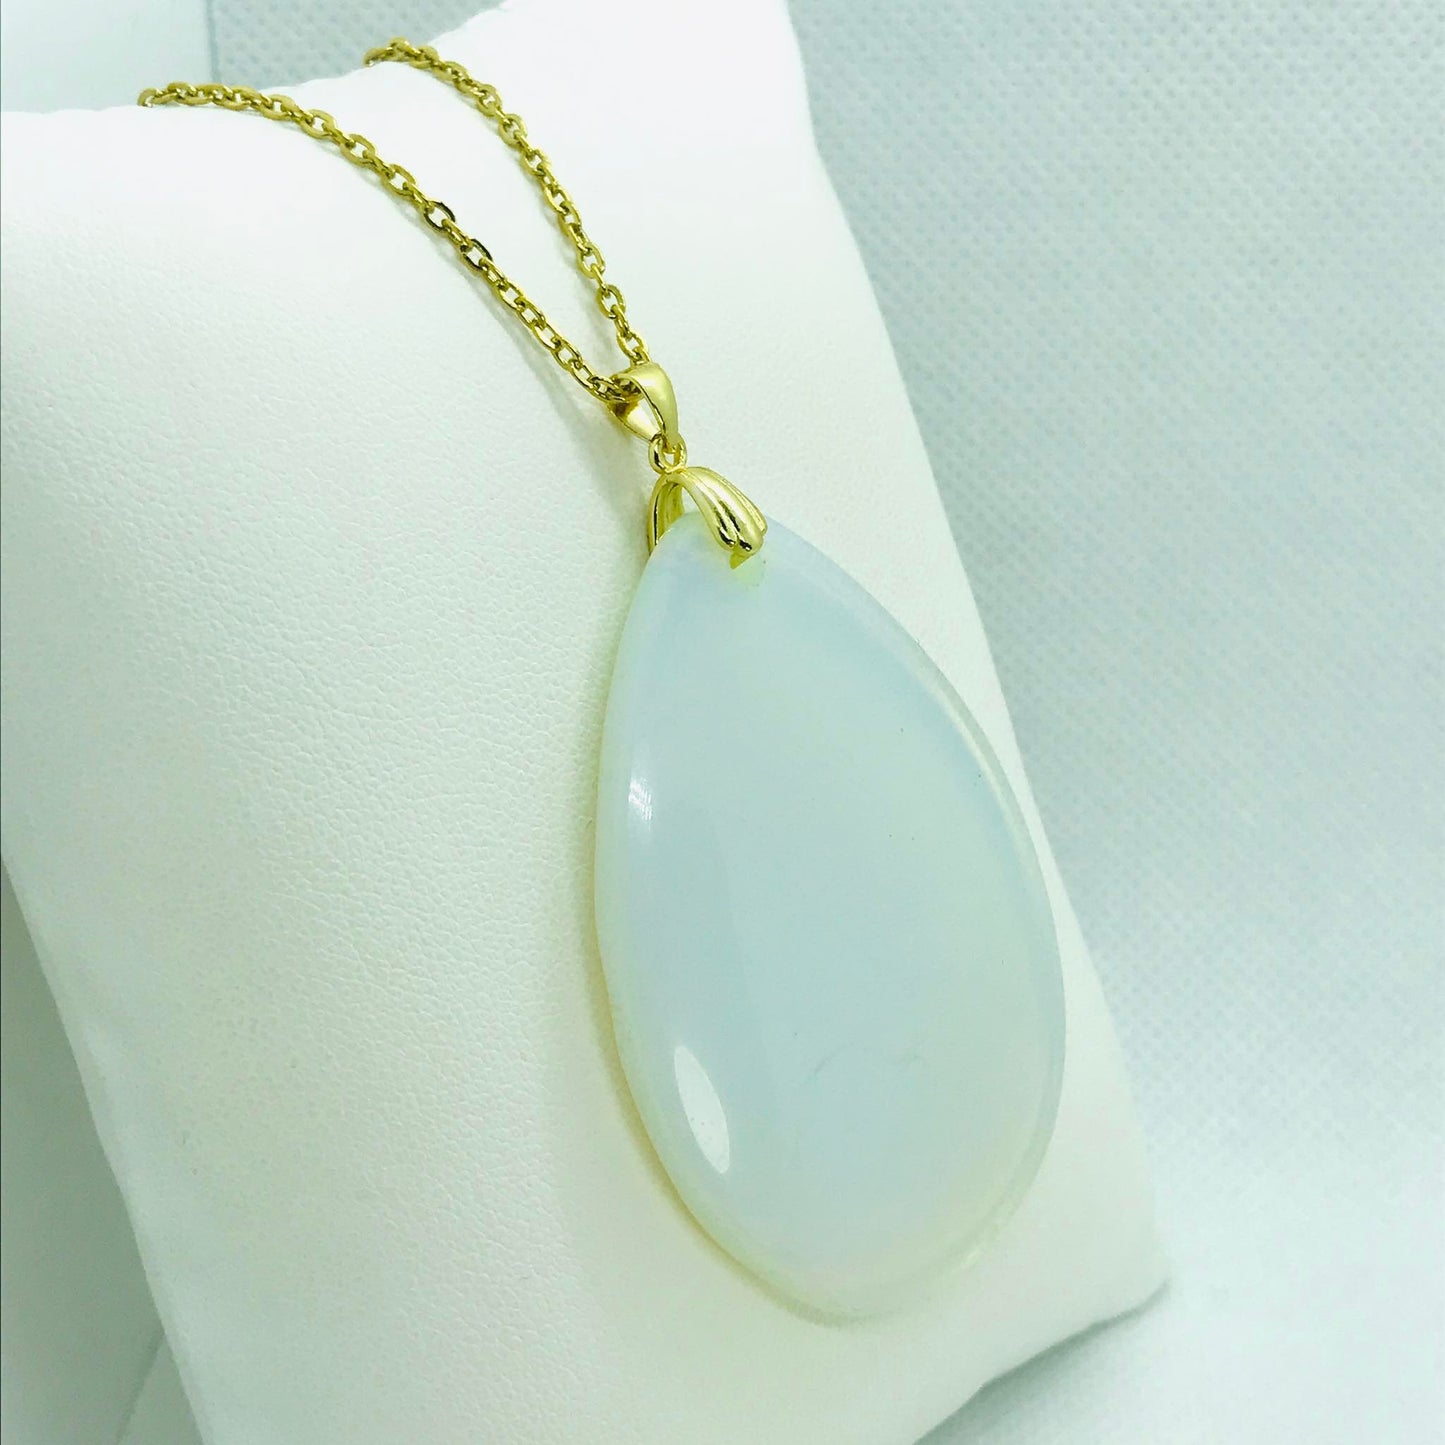 Natural Opal Teardrop Pendant - Stainless Steel Gold Plated Chain Necklace